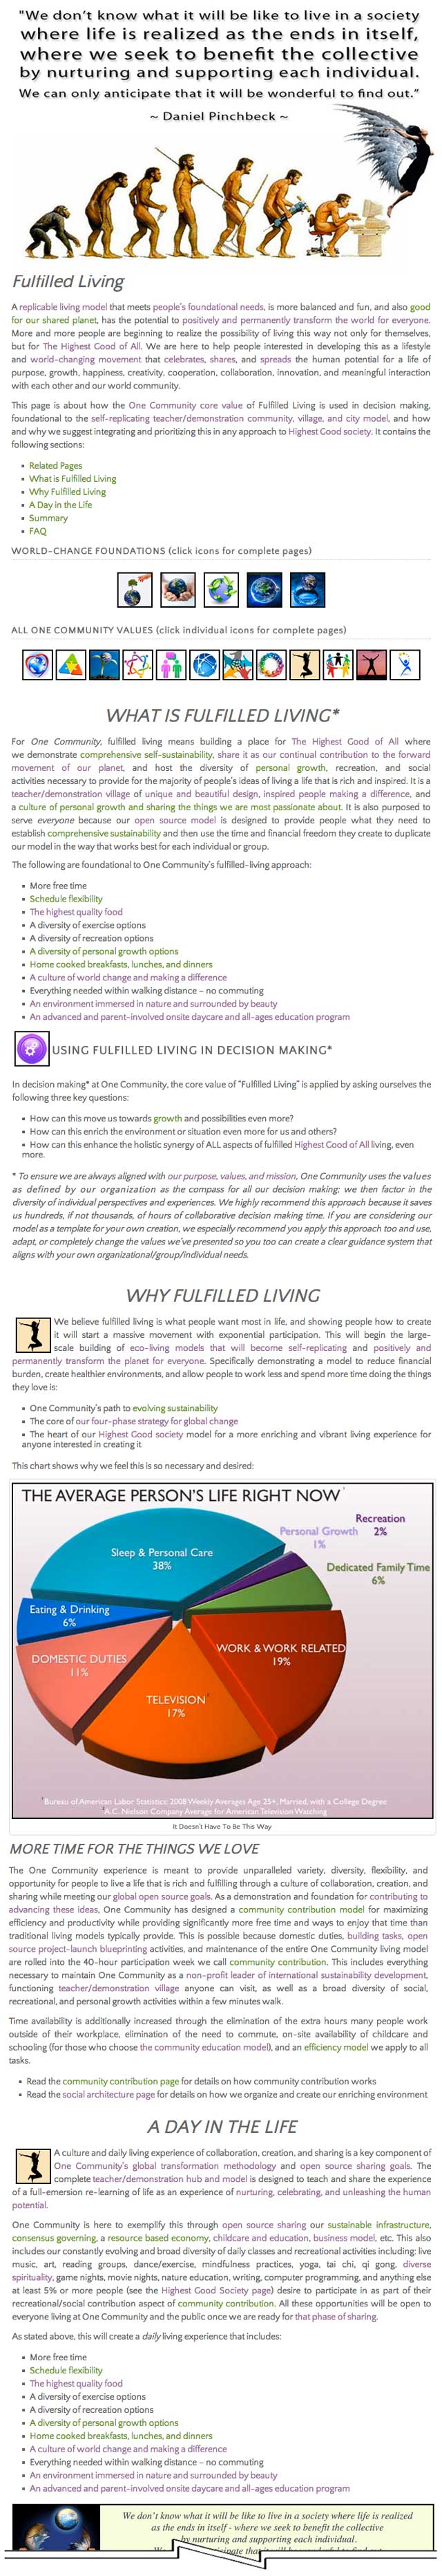 Fulfilled Living Page, One Community